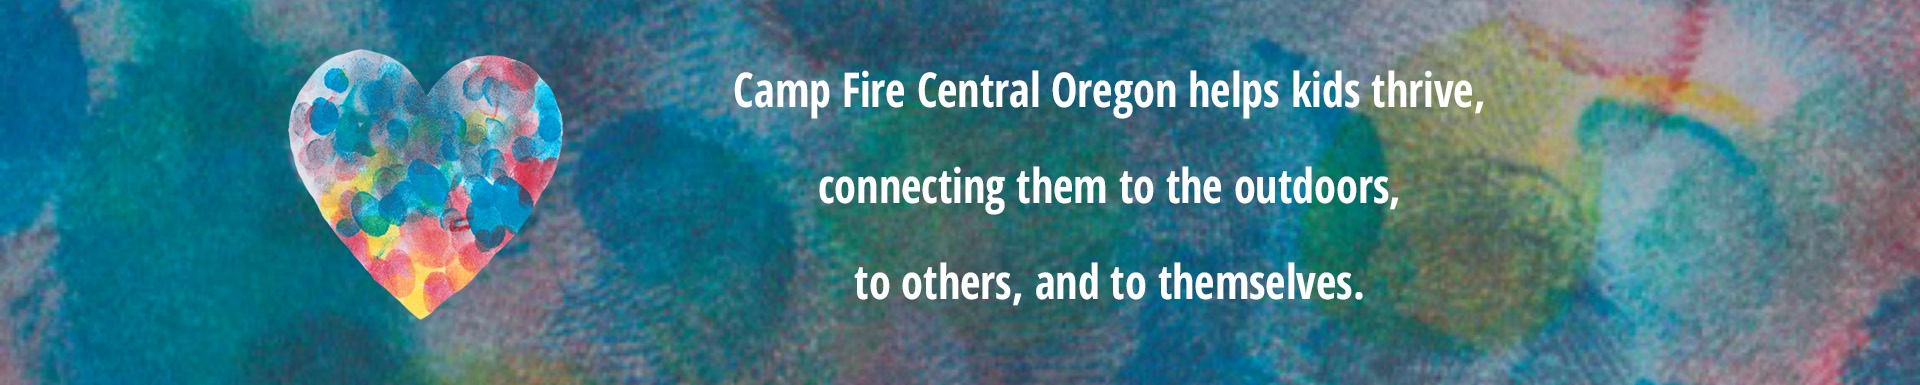 Heart painted by campers with the text, 'Camp Fire Central Oregon helps kids thrive,connecting them to the outdoors,to others, and to themselves.'